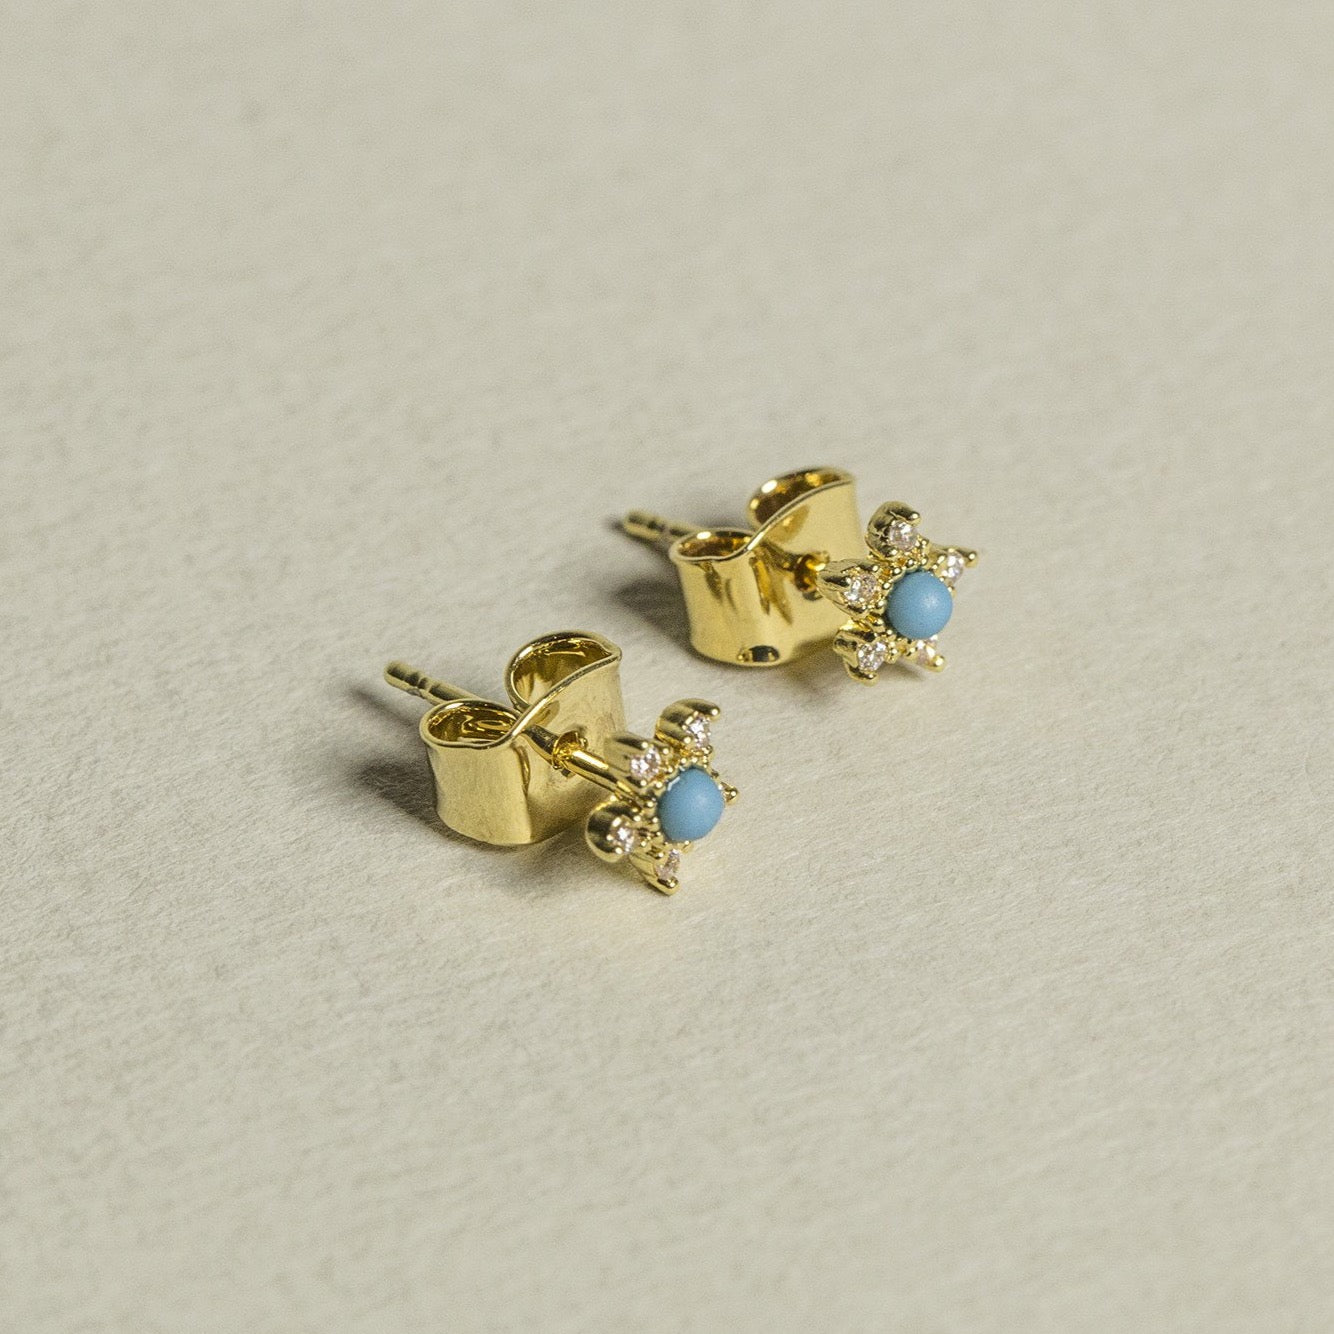 bright turquoise and sparkly crystals in a delicious gold frame - we present you Tai turquoise flower stud earrings